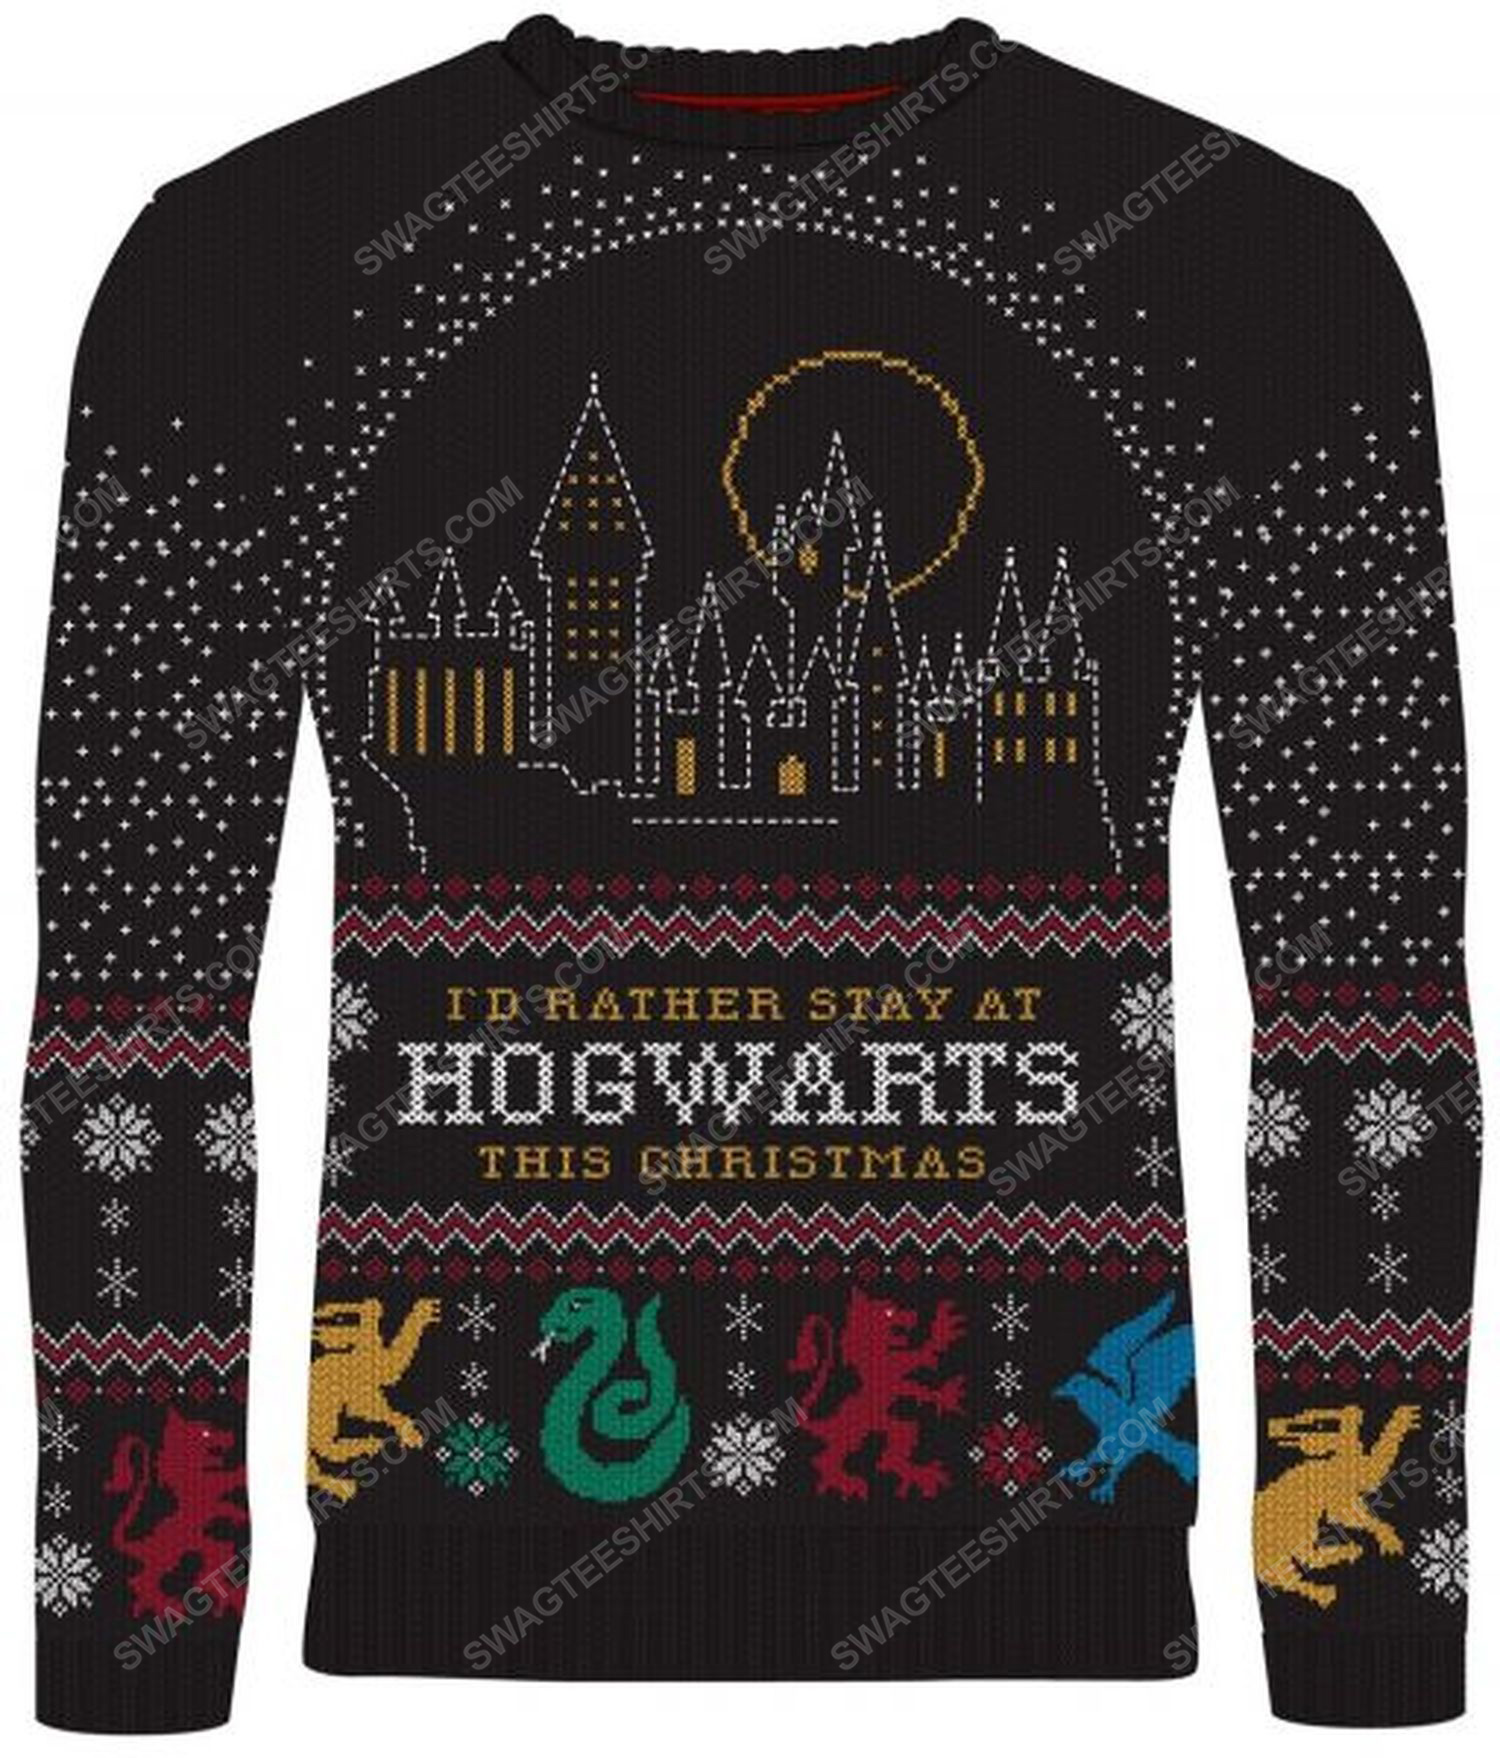 Harry potter i'd rather stay at hogwarts this christmas full print ugly christmas sweater 2 - Copy (2)